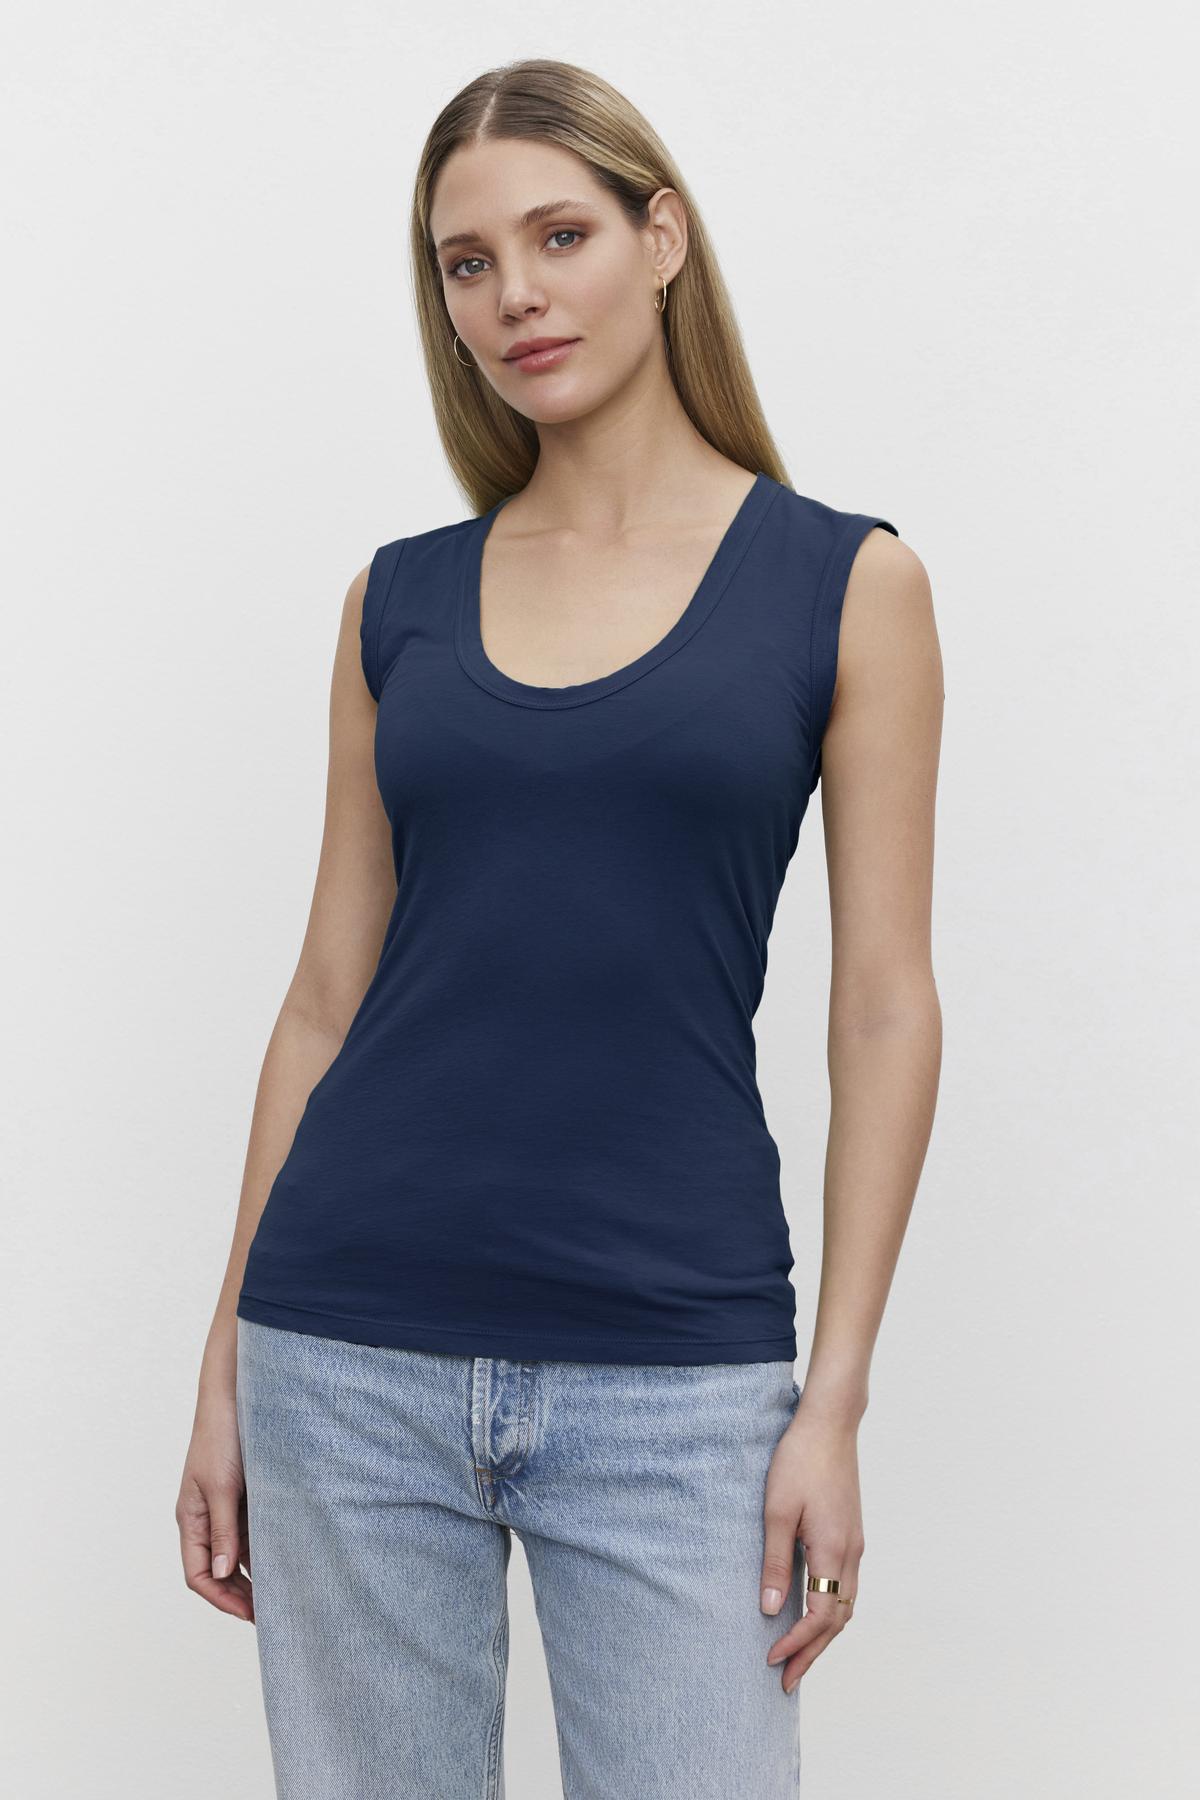   A woman with long hair is wearing a navy blue low-scoop-neck sleeveless Velvet by Graham & Spencer ESTINA TANK TOP and light blue jeans, standing against a plain white background. 